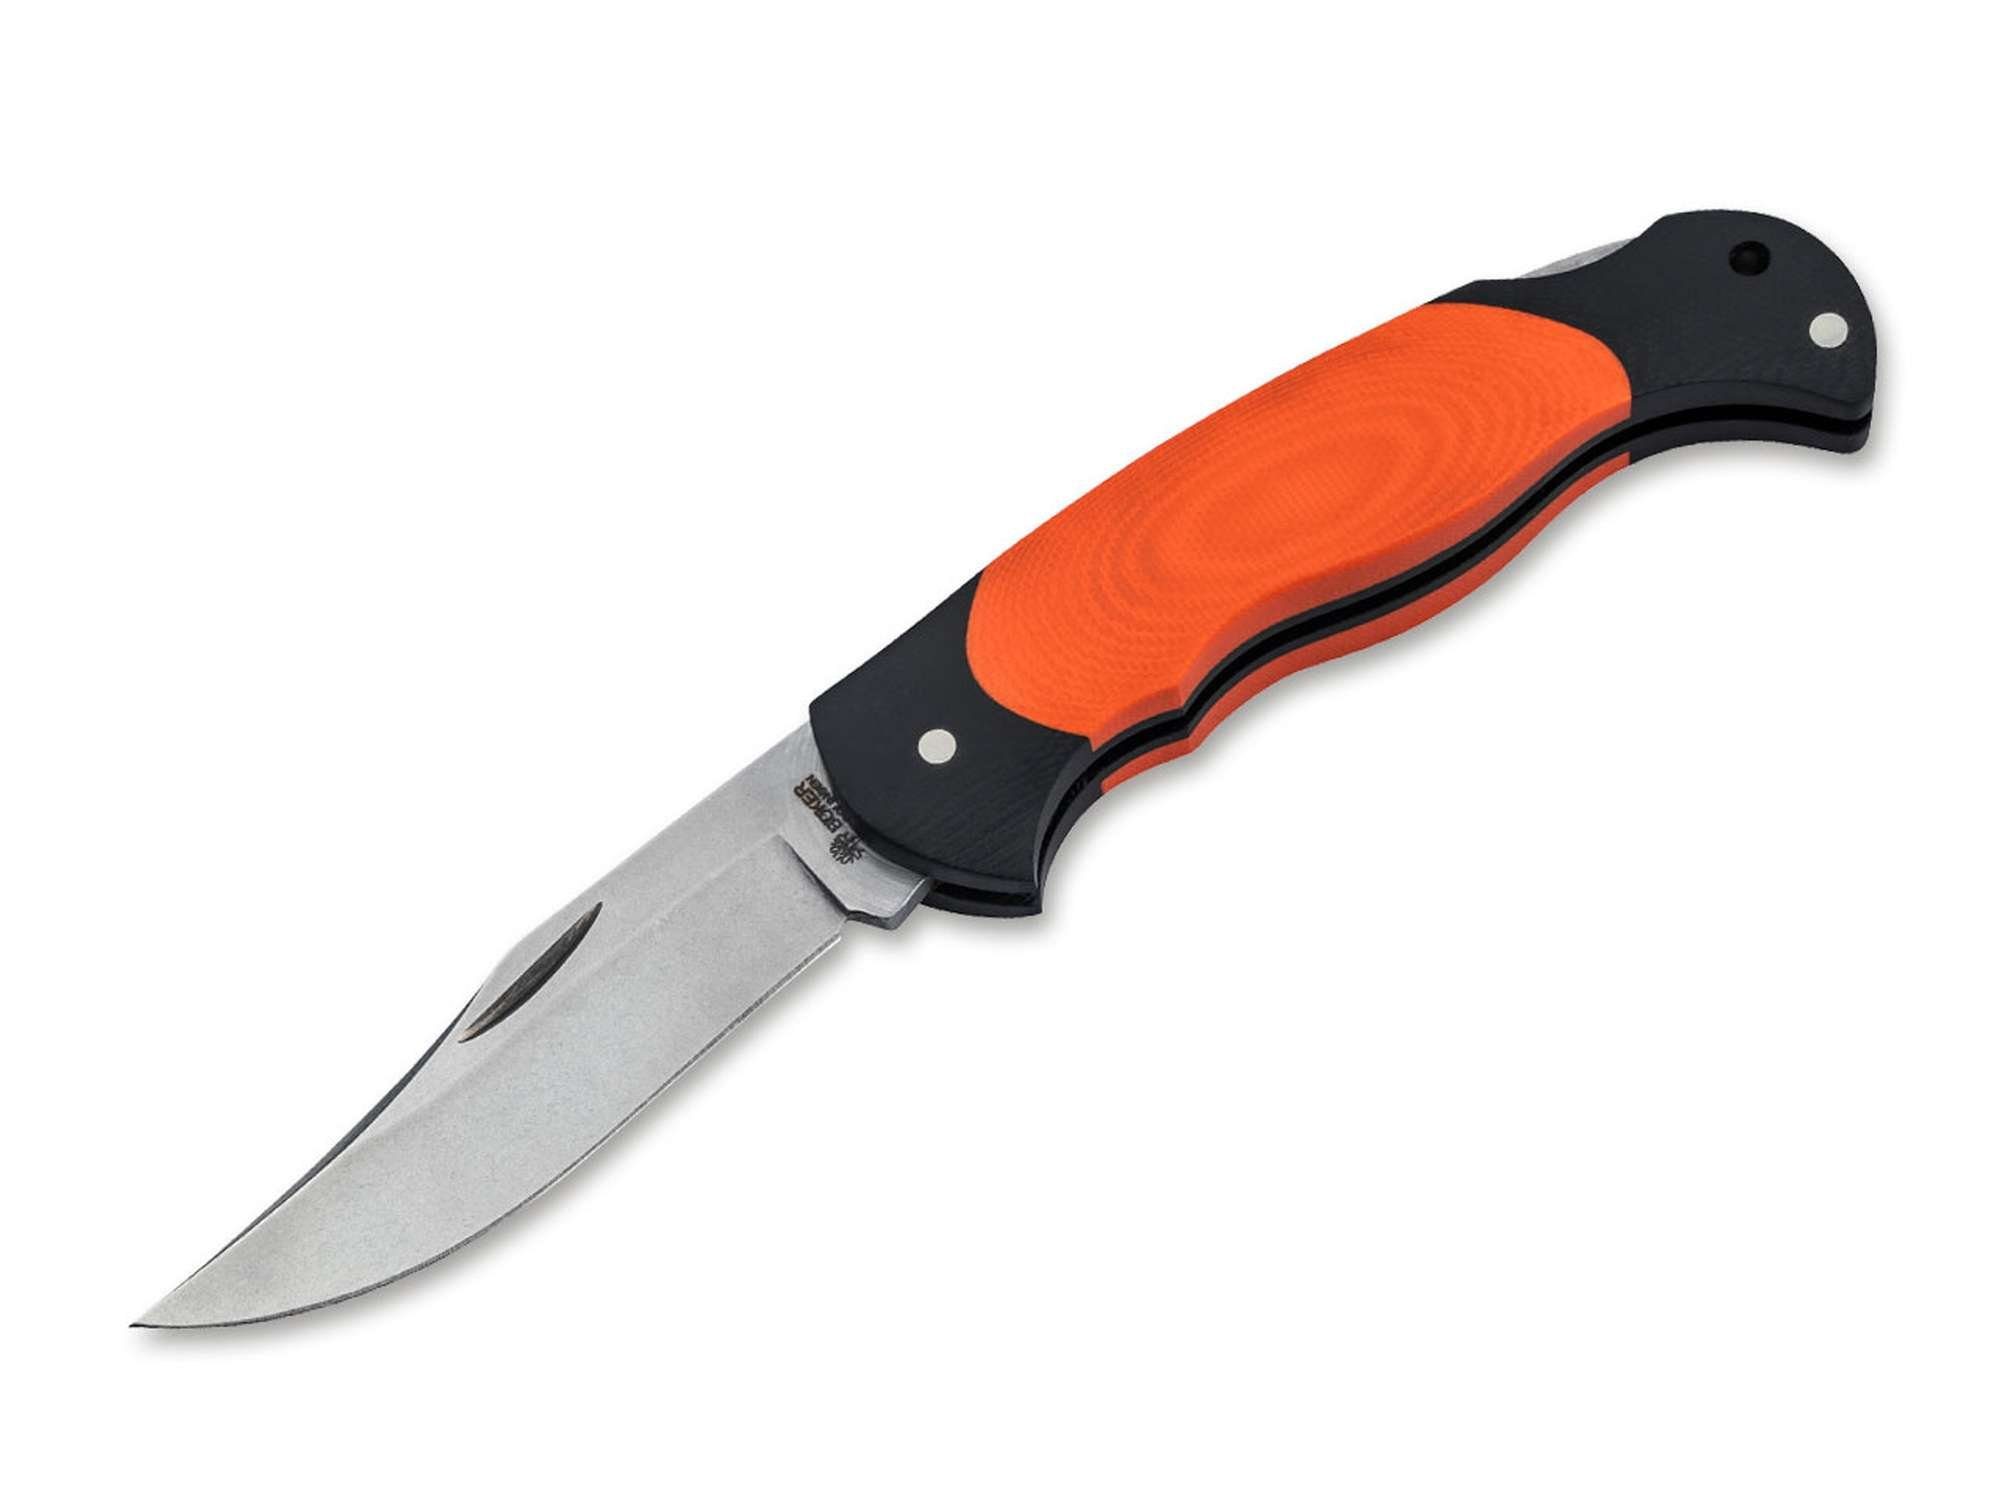 Orange Böker Black Böker Black Orange, Böker Taschenmesser Scout G10 G10 Scout